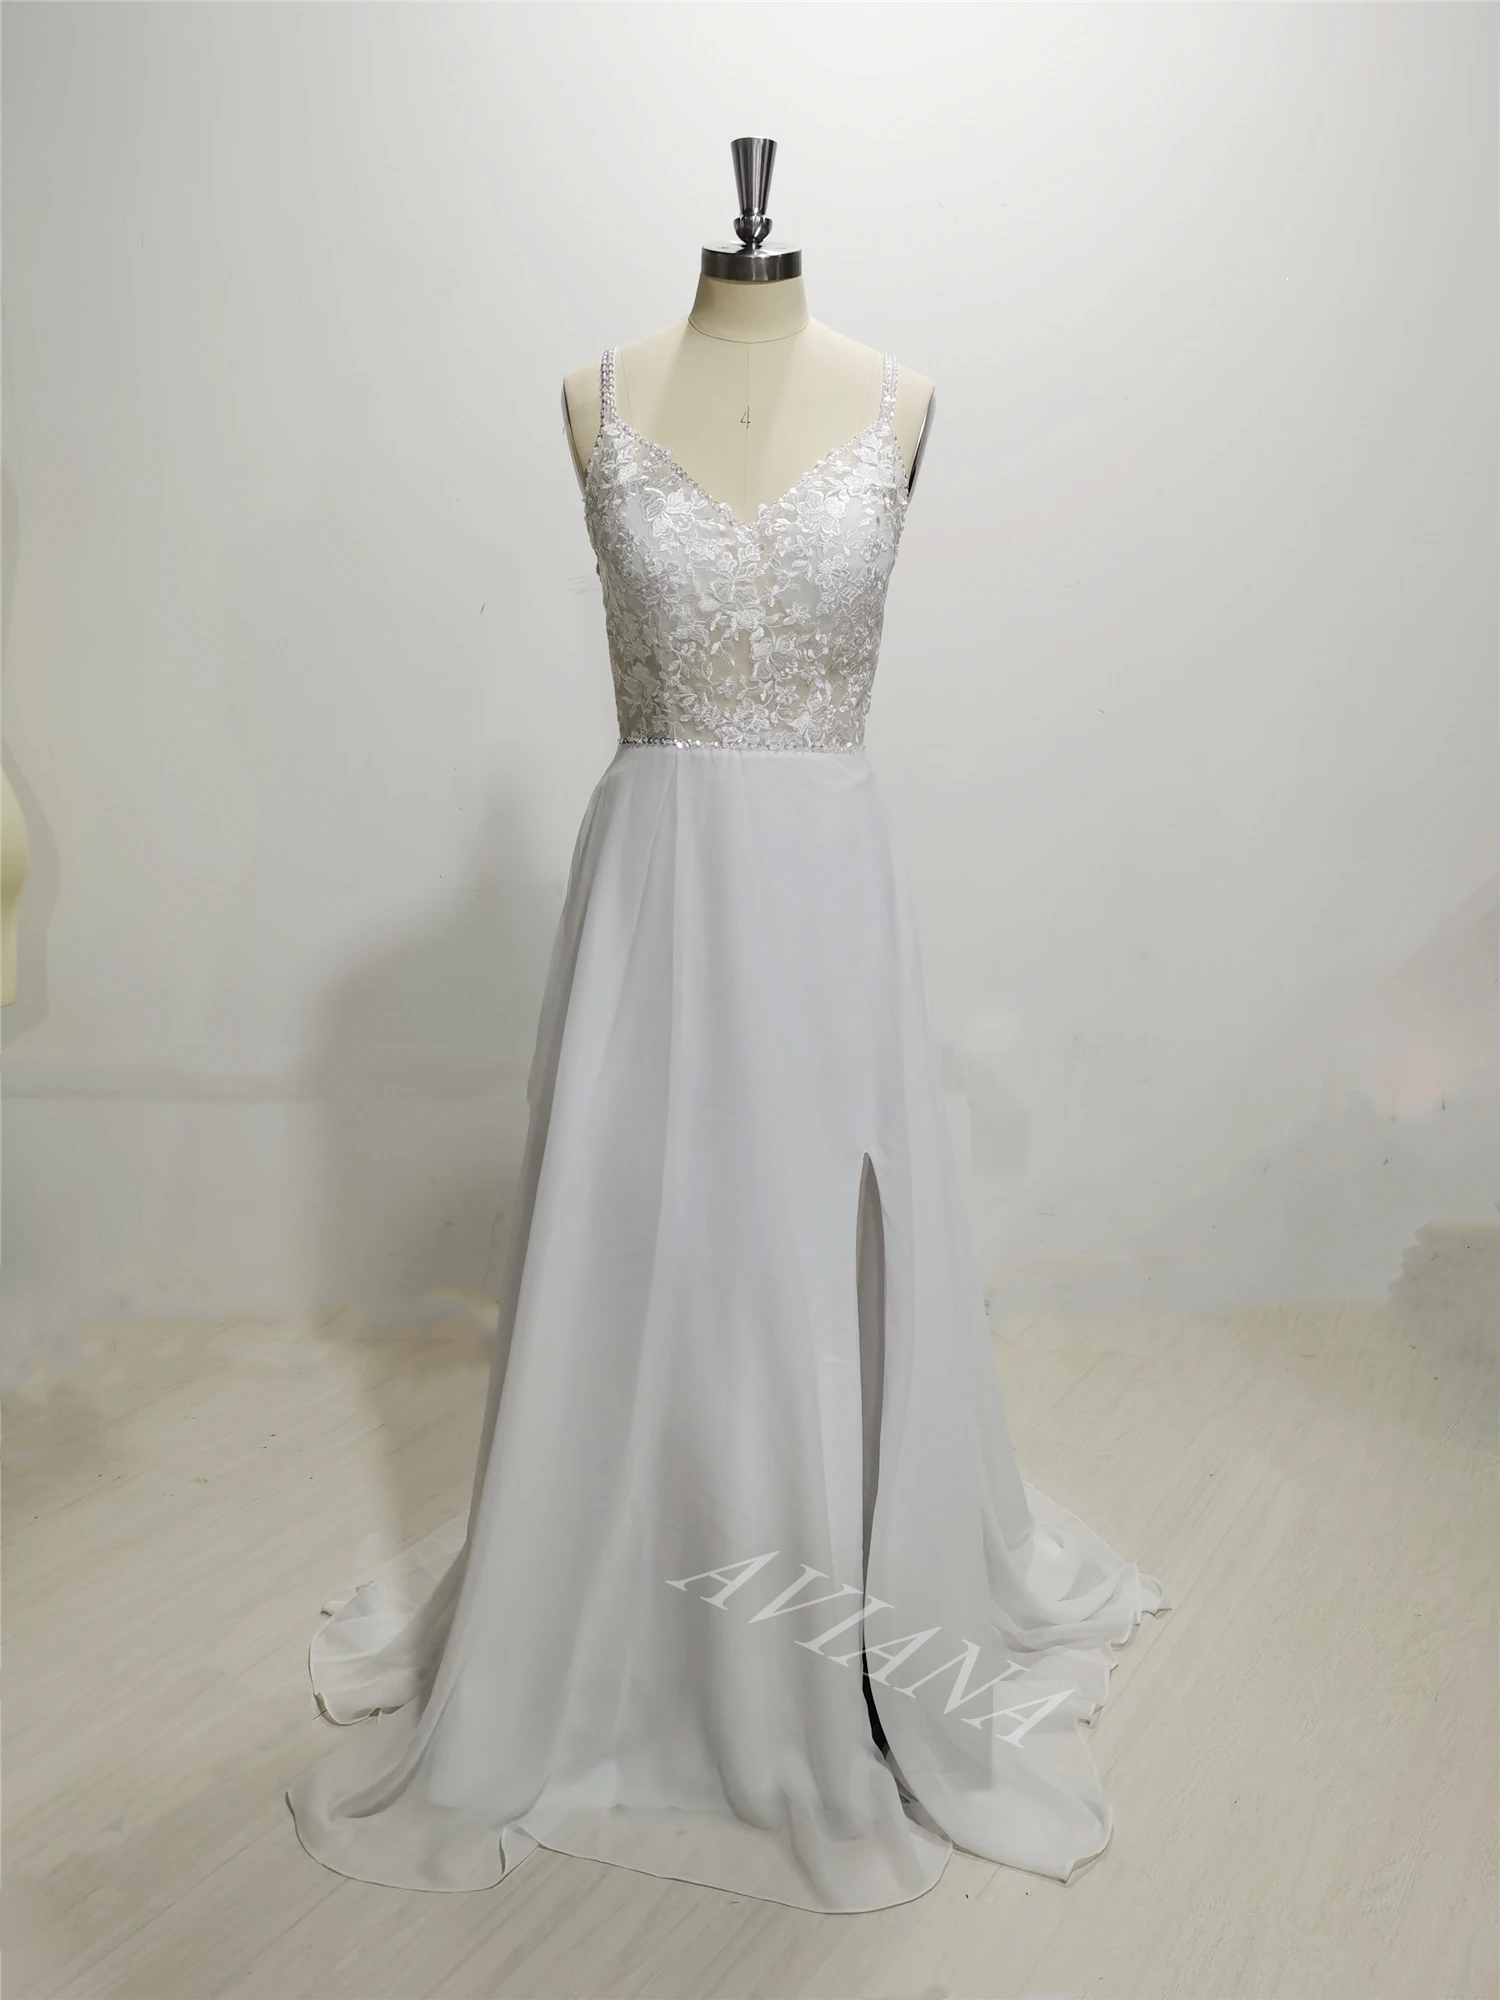 Simple V-Neck Front High Split Wedding Dresses For Women Custom Made 2022 Lace Appliques Chiffon Spaghetti Straps Bridal Gown 5